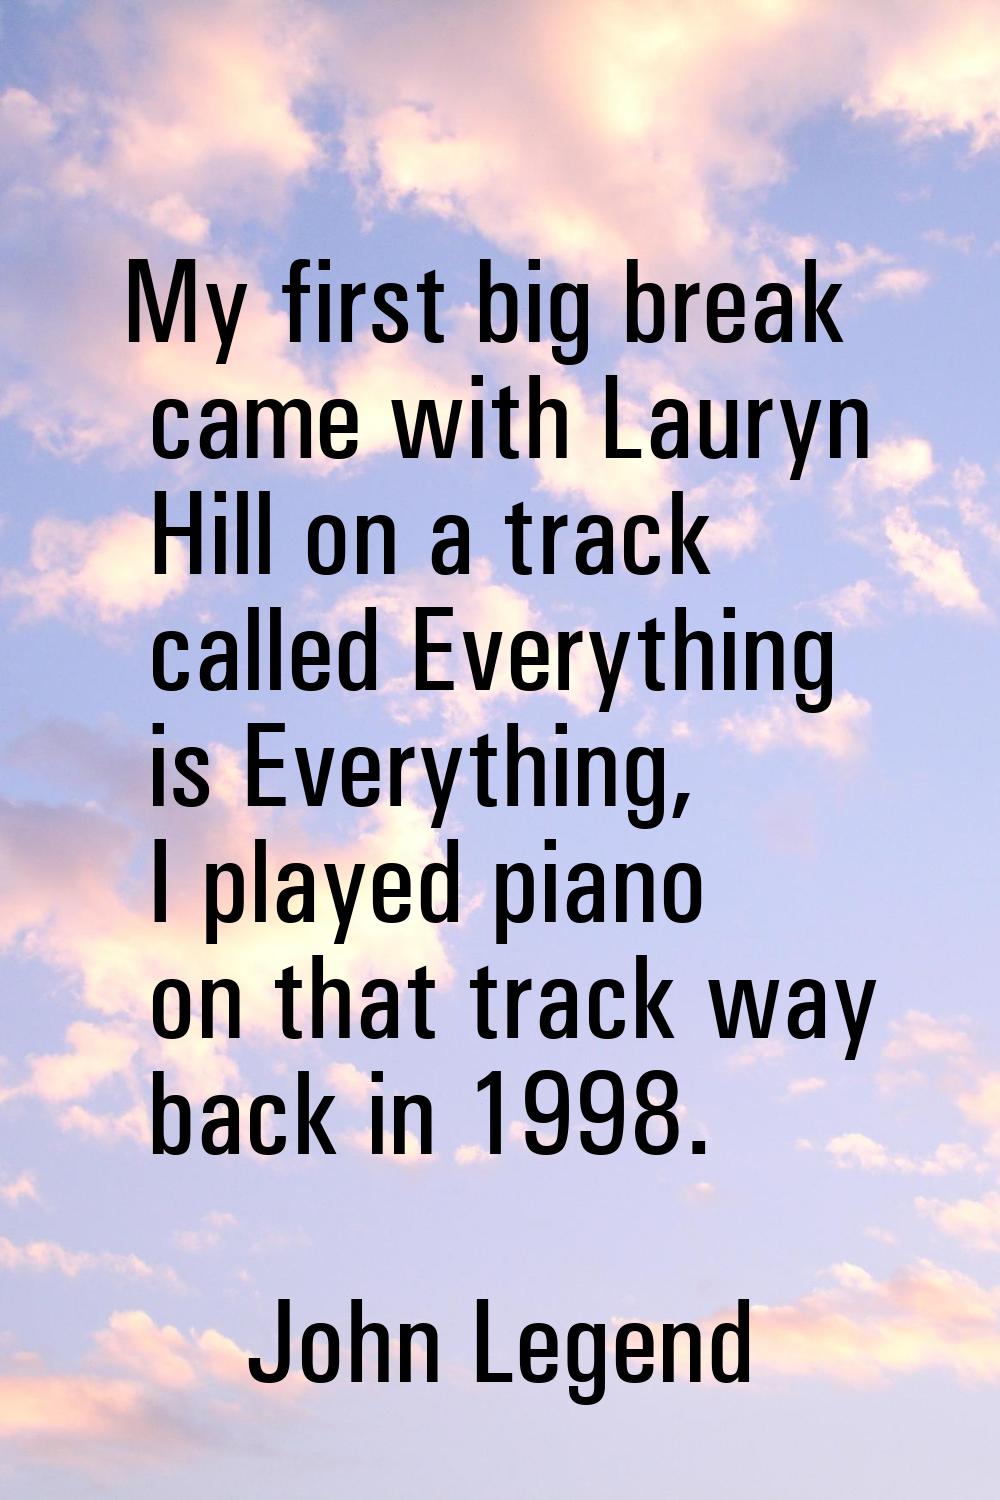 My first big break came with Lauryn Hill on a track called Everything is Everything, I played piano